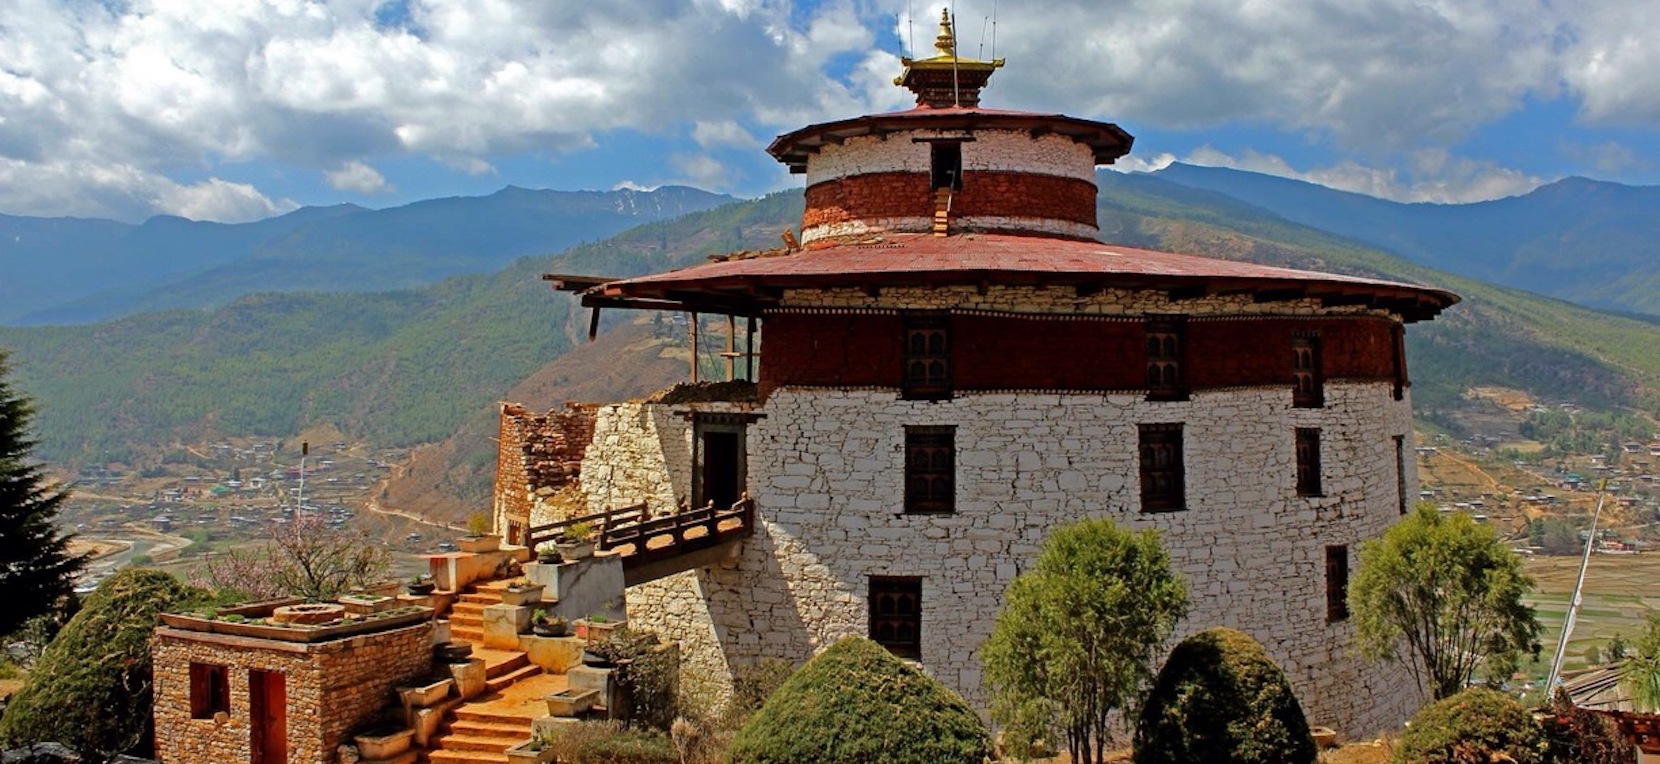 4 Day Tast of Bhutan Premium Private tour (business class flight from Bangkok included) High Season